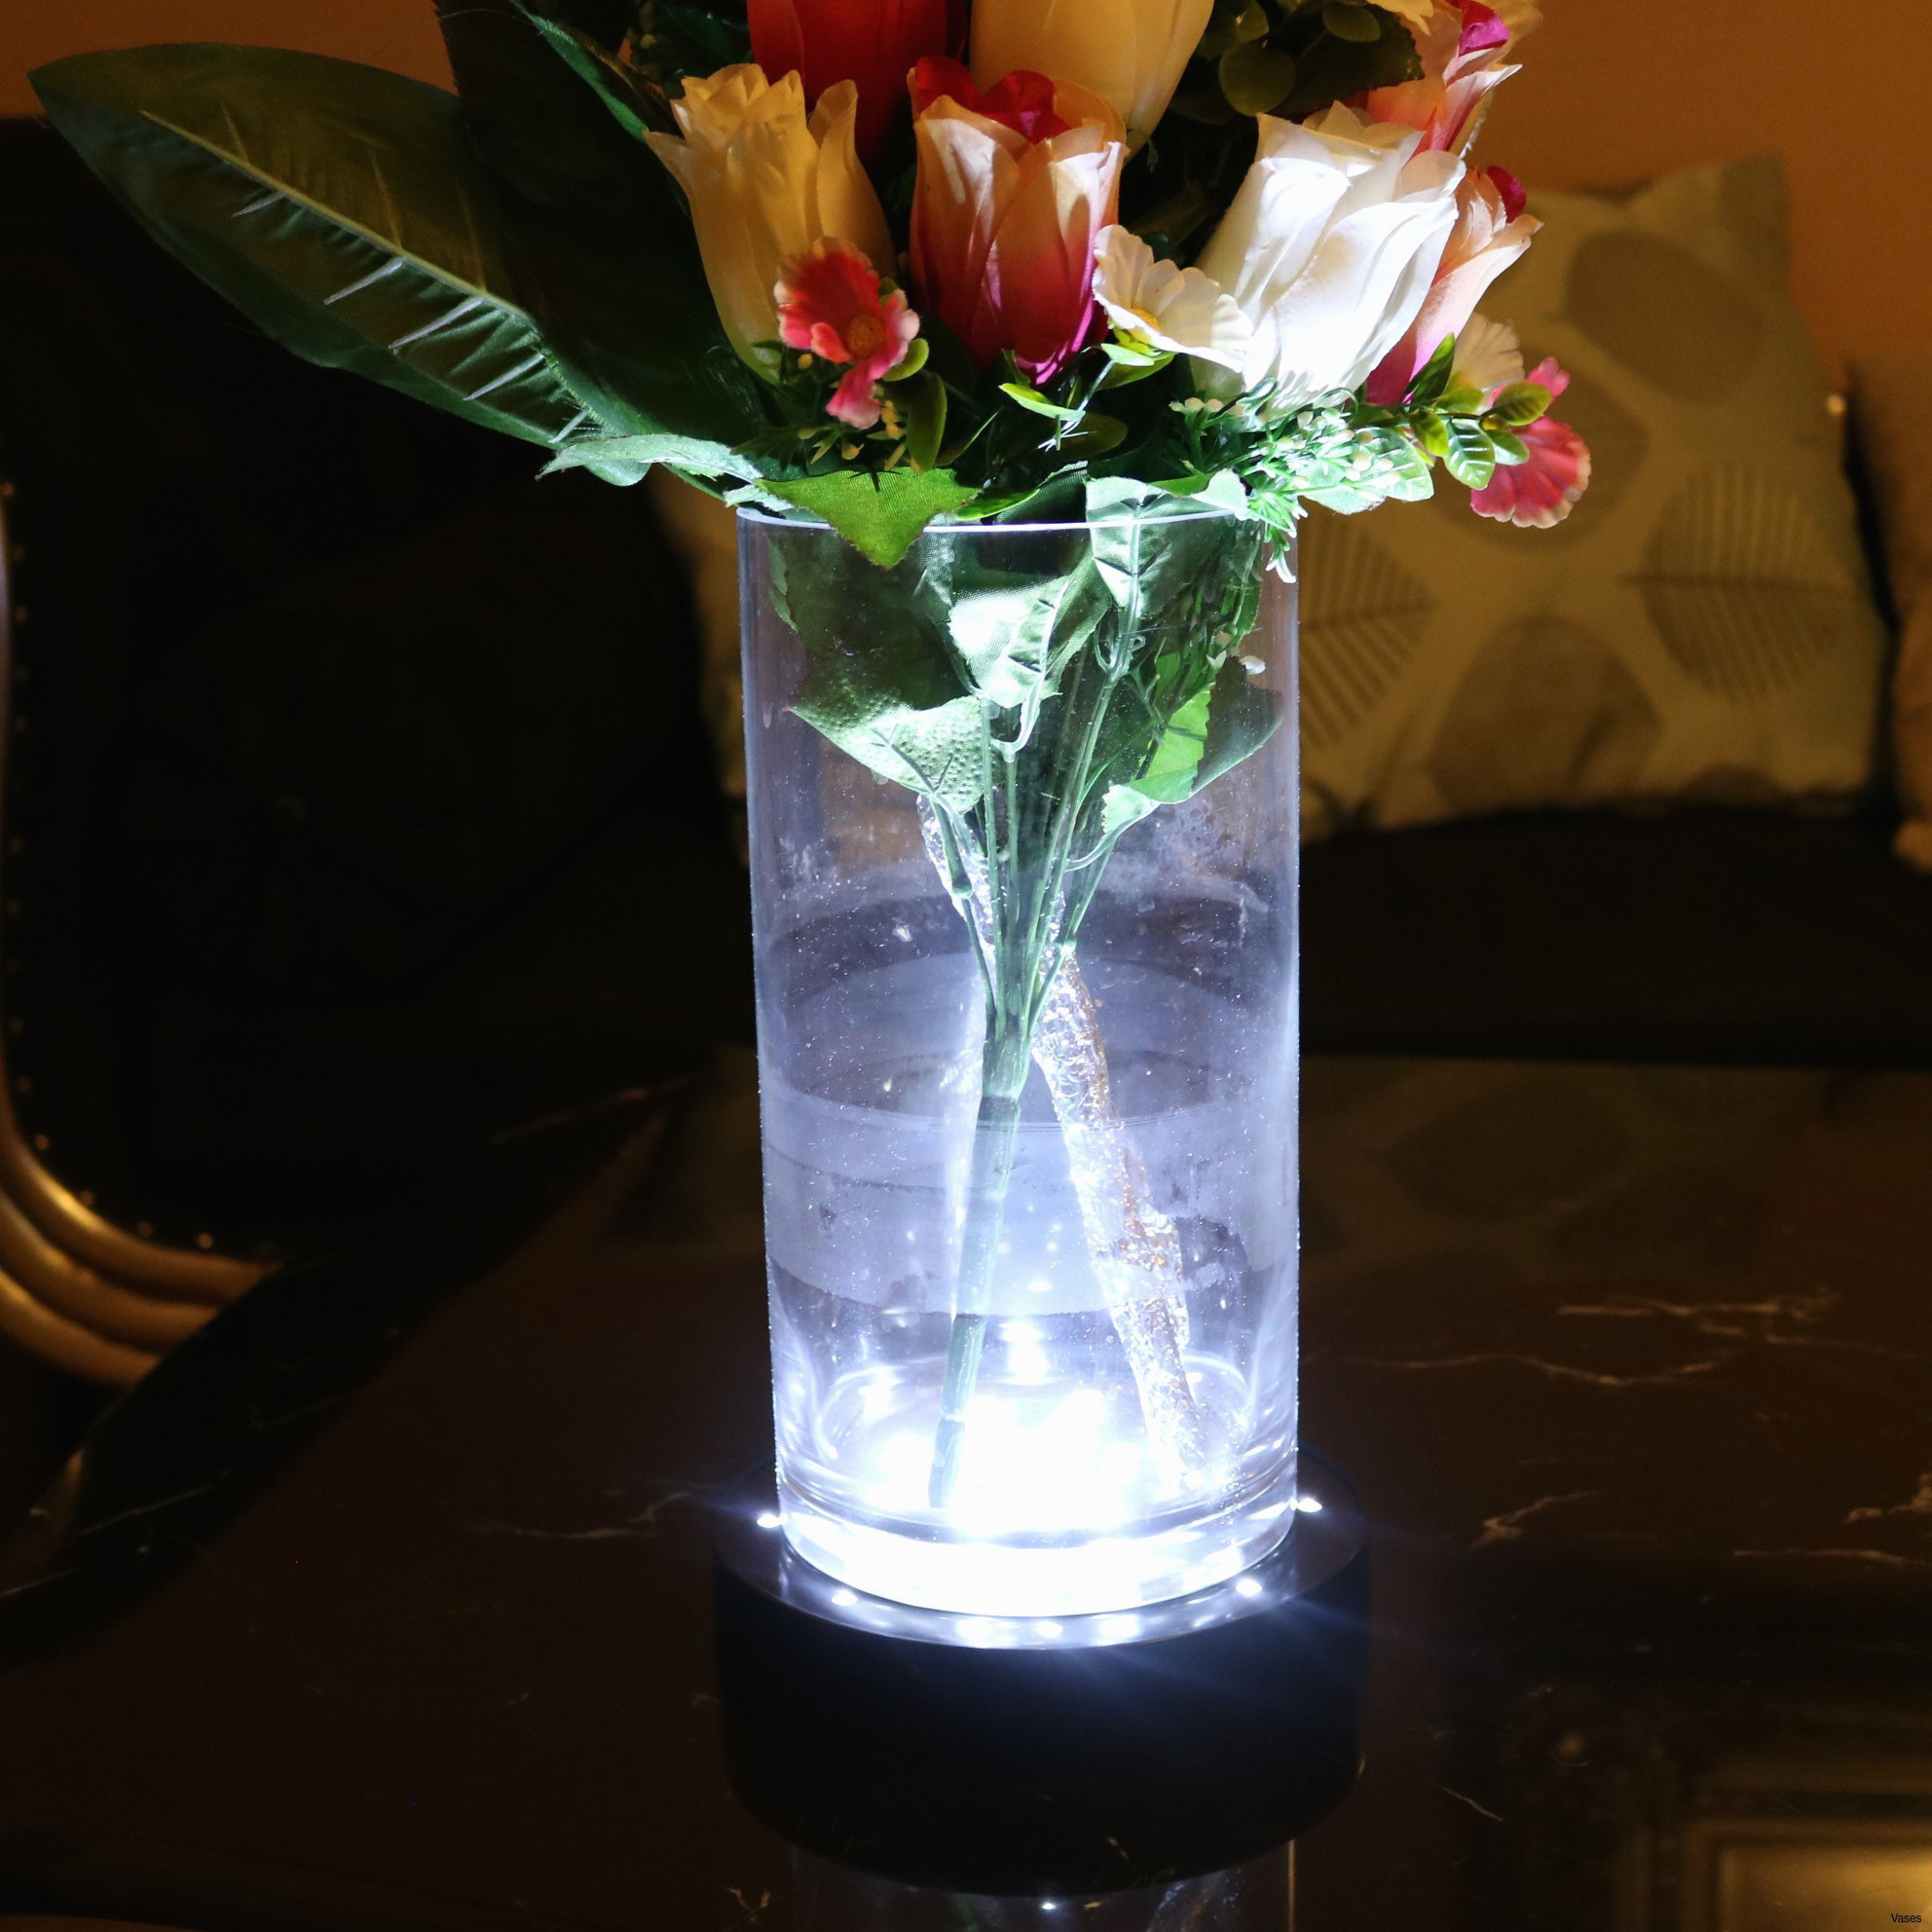 27 Unique Cheap Tall Glass Vases for Centerpieces 2024 free download cheap tall glass vases for centerpieces of elegant tall vase centerpiece ideas vases flowers in water 0d in inspirational vases disposable plastic single cheap flower rose vasei 0d design of